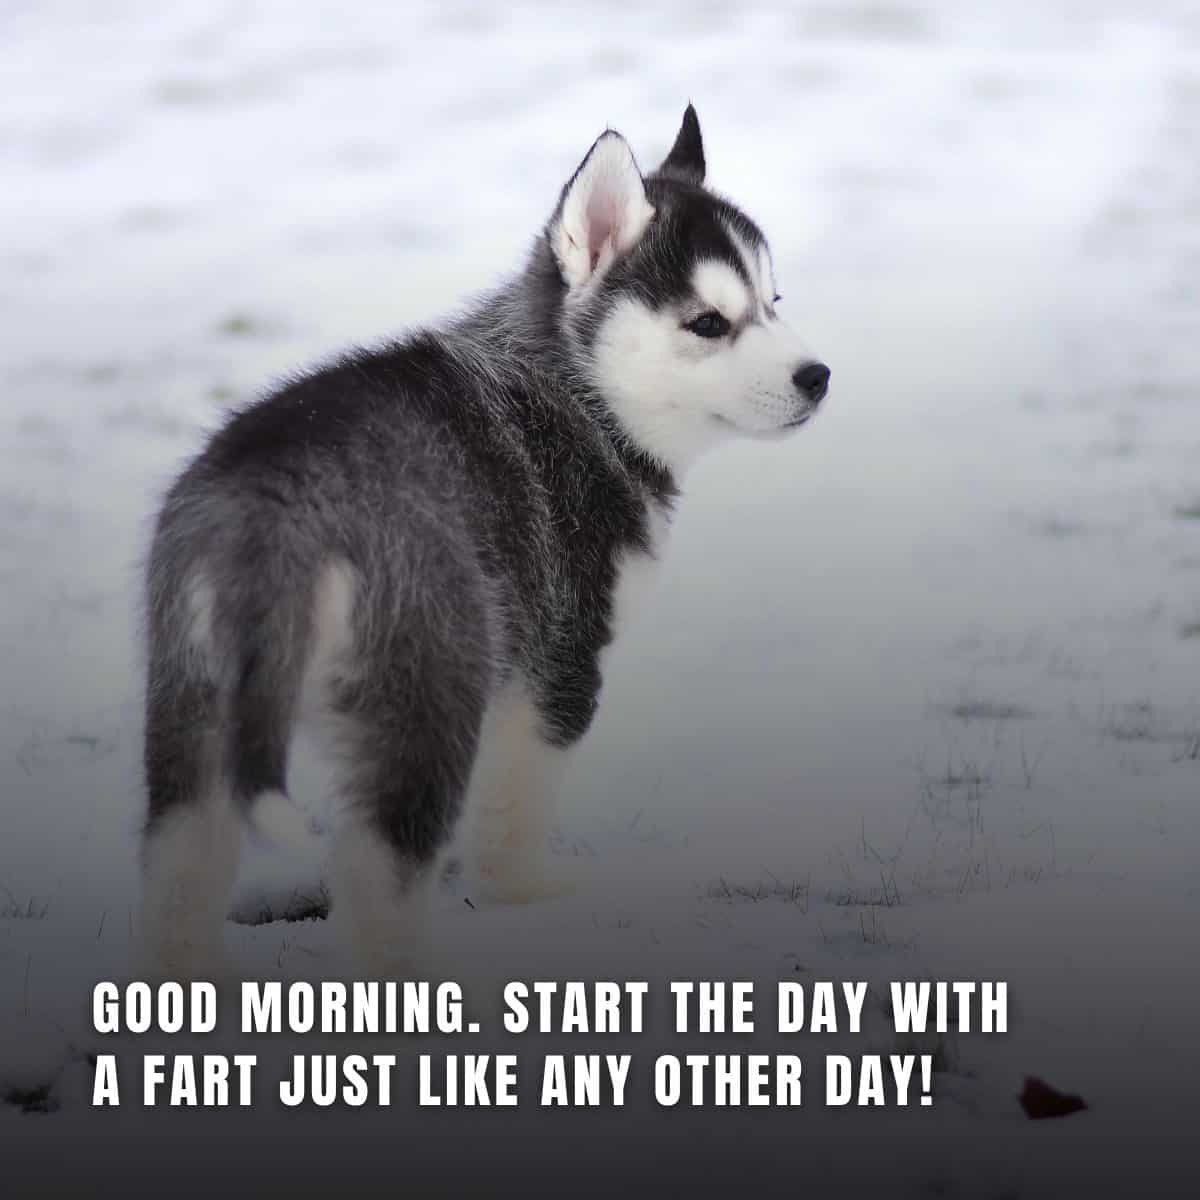 Good Morning. Start The Day With A Fart Just Like Any Other Day